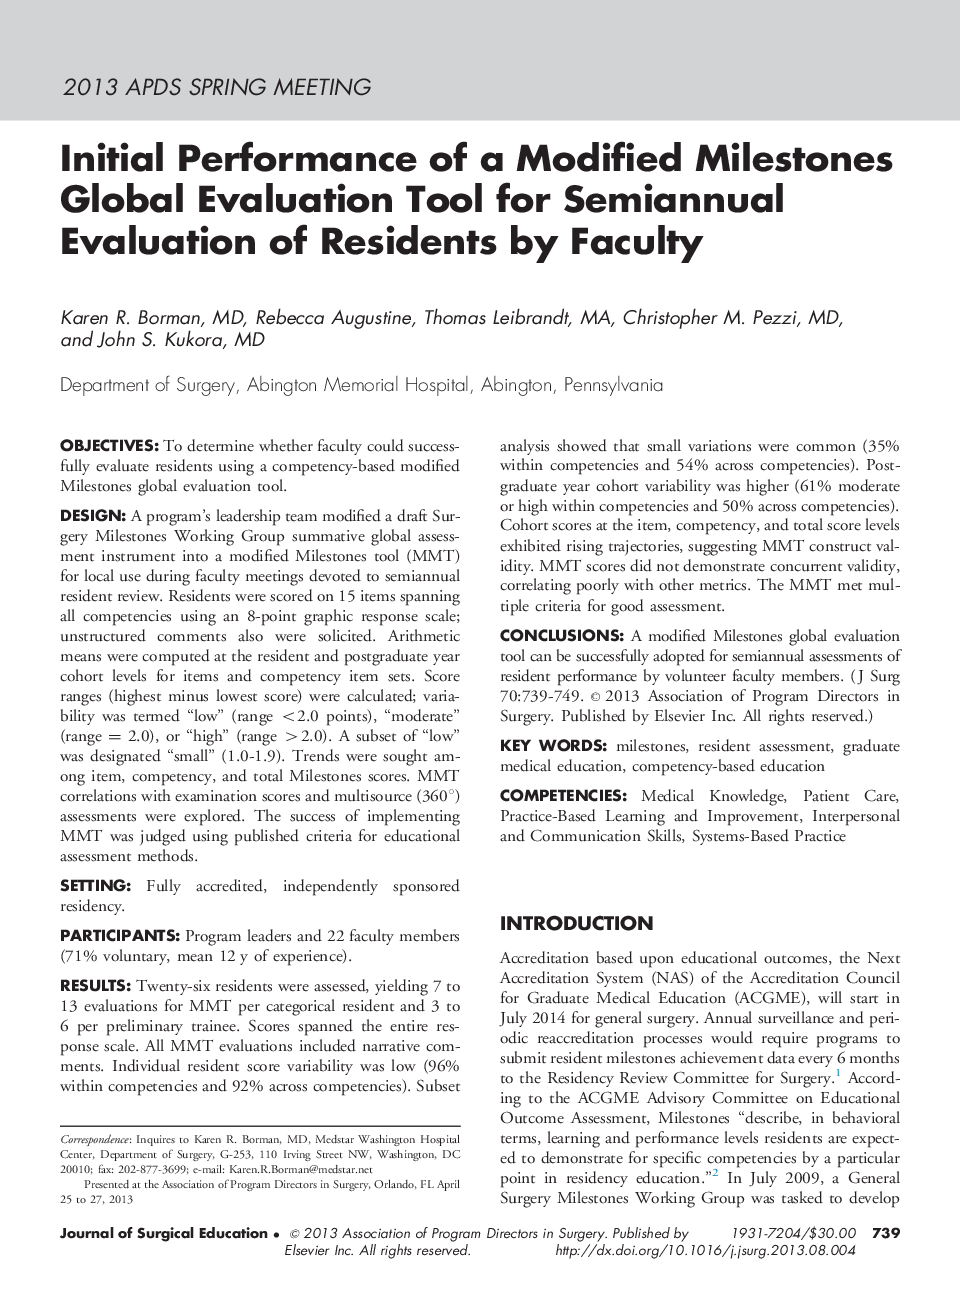 Initial Performance of a Modified Milestones Global Evaluation Tool for Semiannual Evaluation of Residents by Faculty 